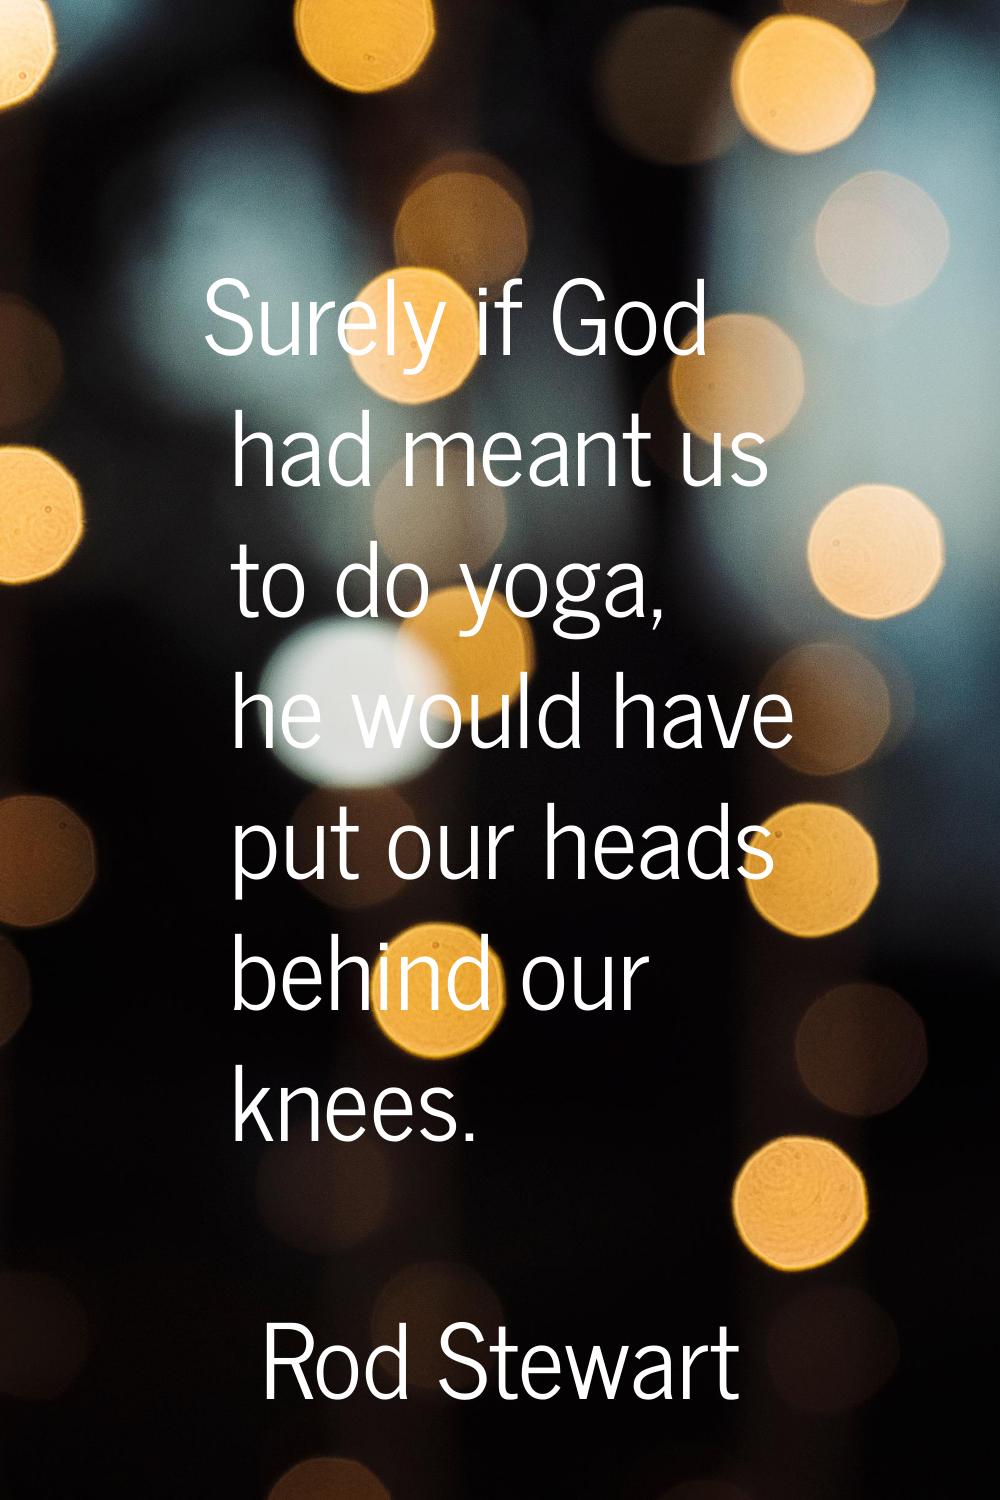 Surely if God had meant us to do yoga, he would have put our heads behind our knees.